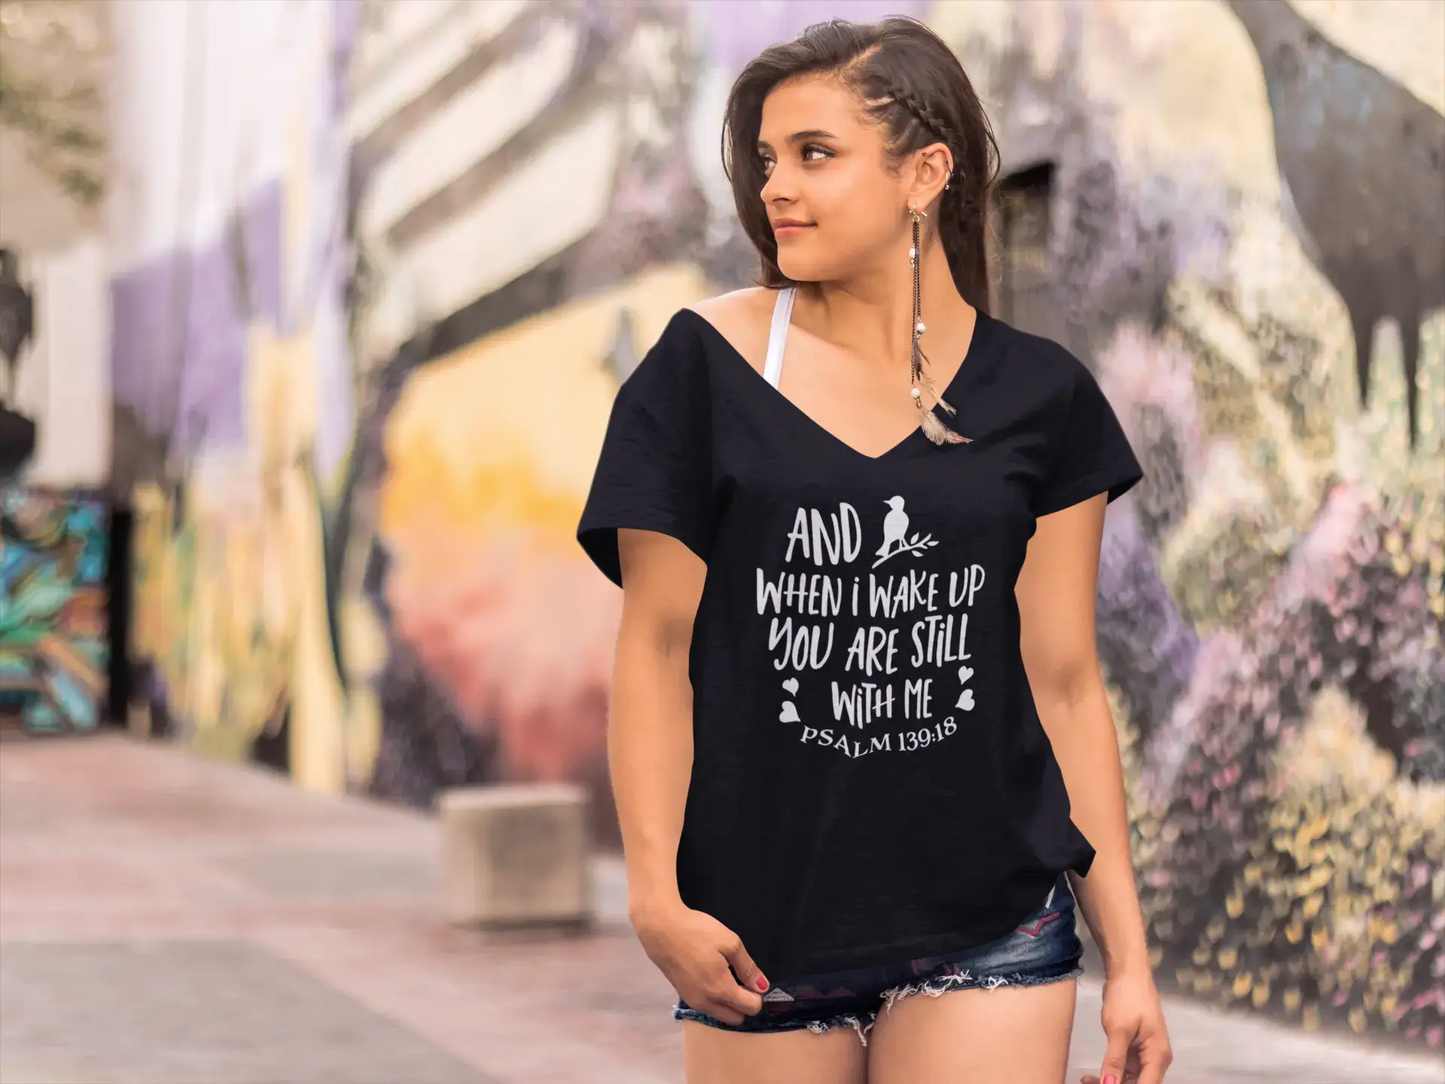 ULTRABASIC Damen-T-Shirt „And When I Wake Up You are Still With Me – Psalm Religiöses T-Shirt“.